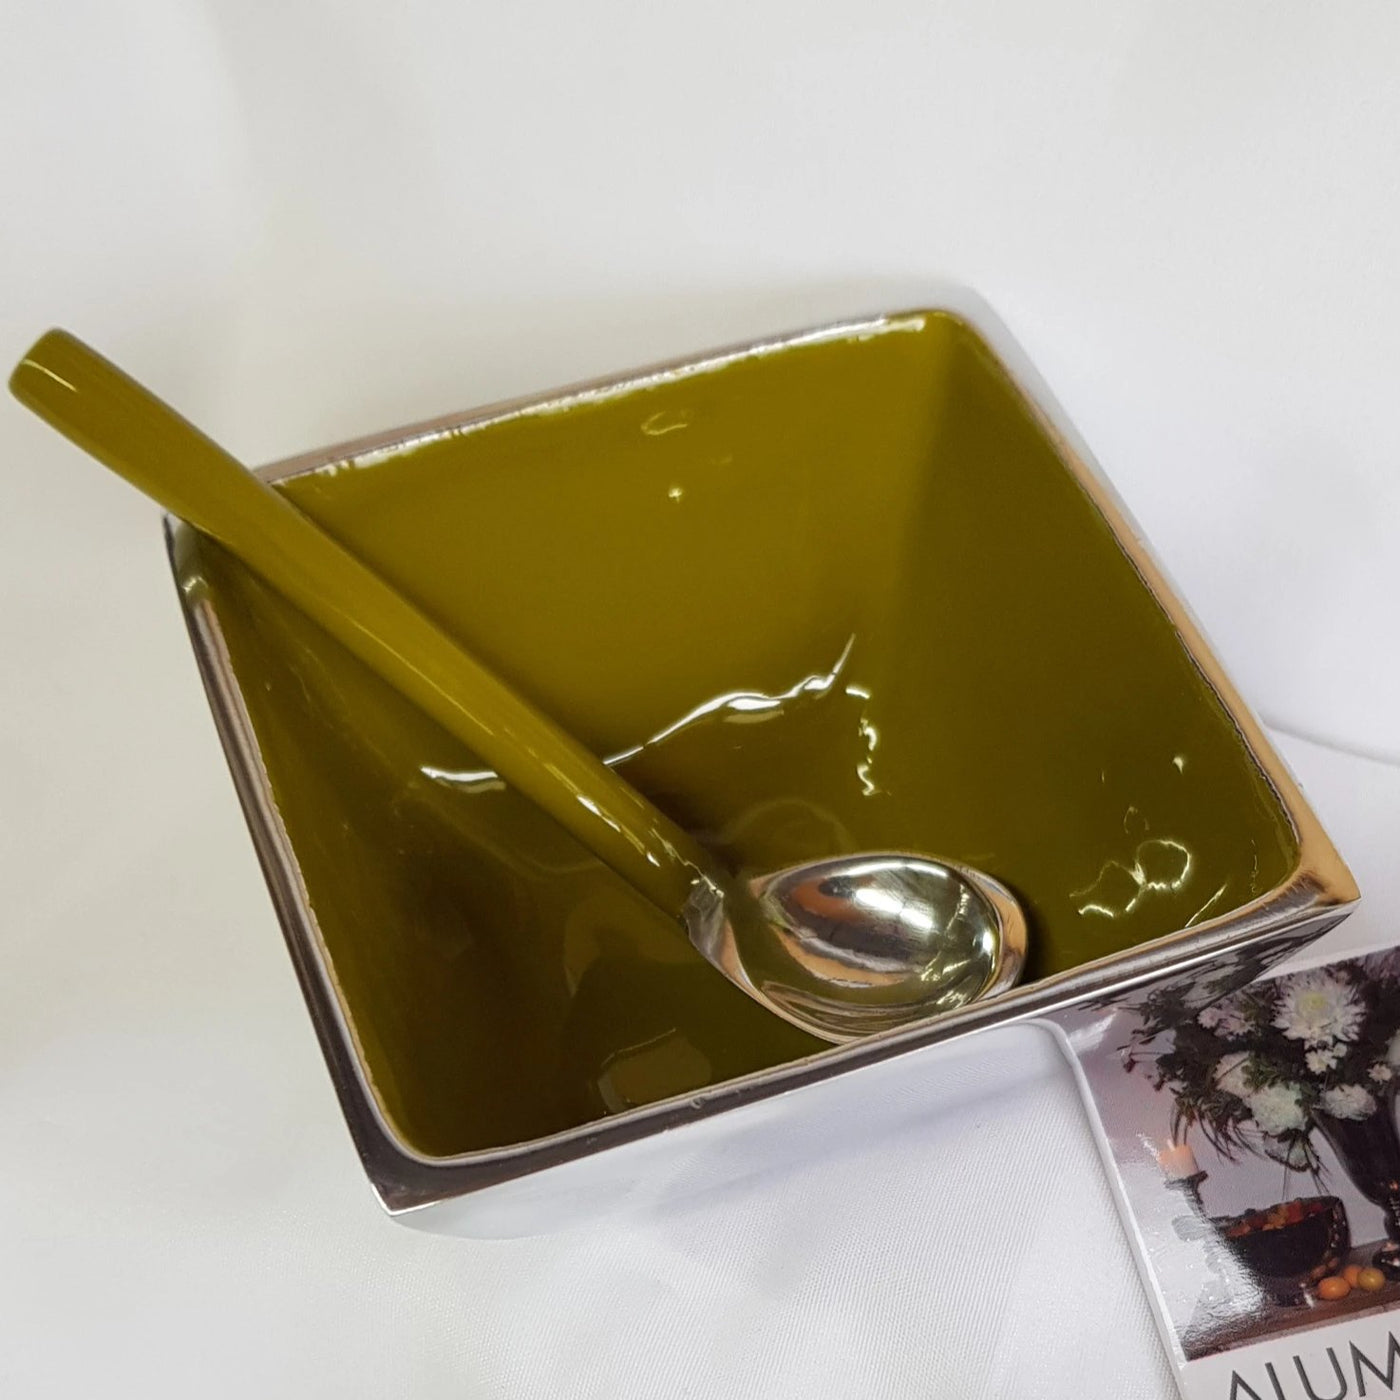 Alumenti Bowl With Spoon